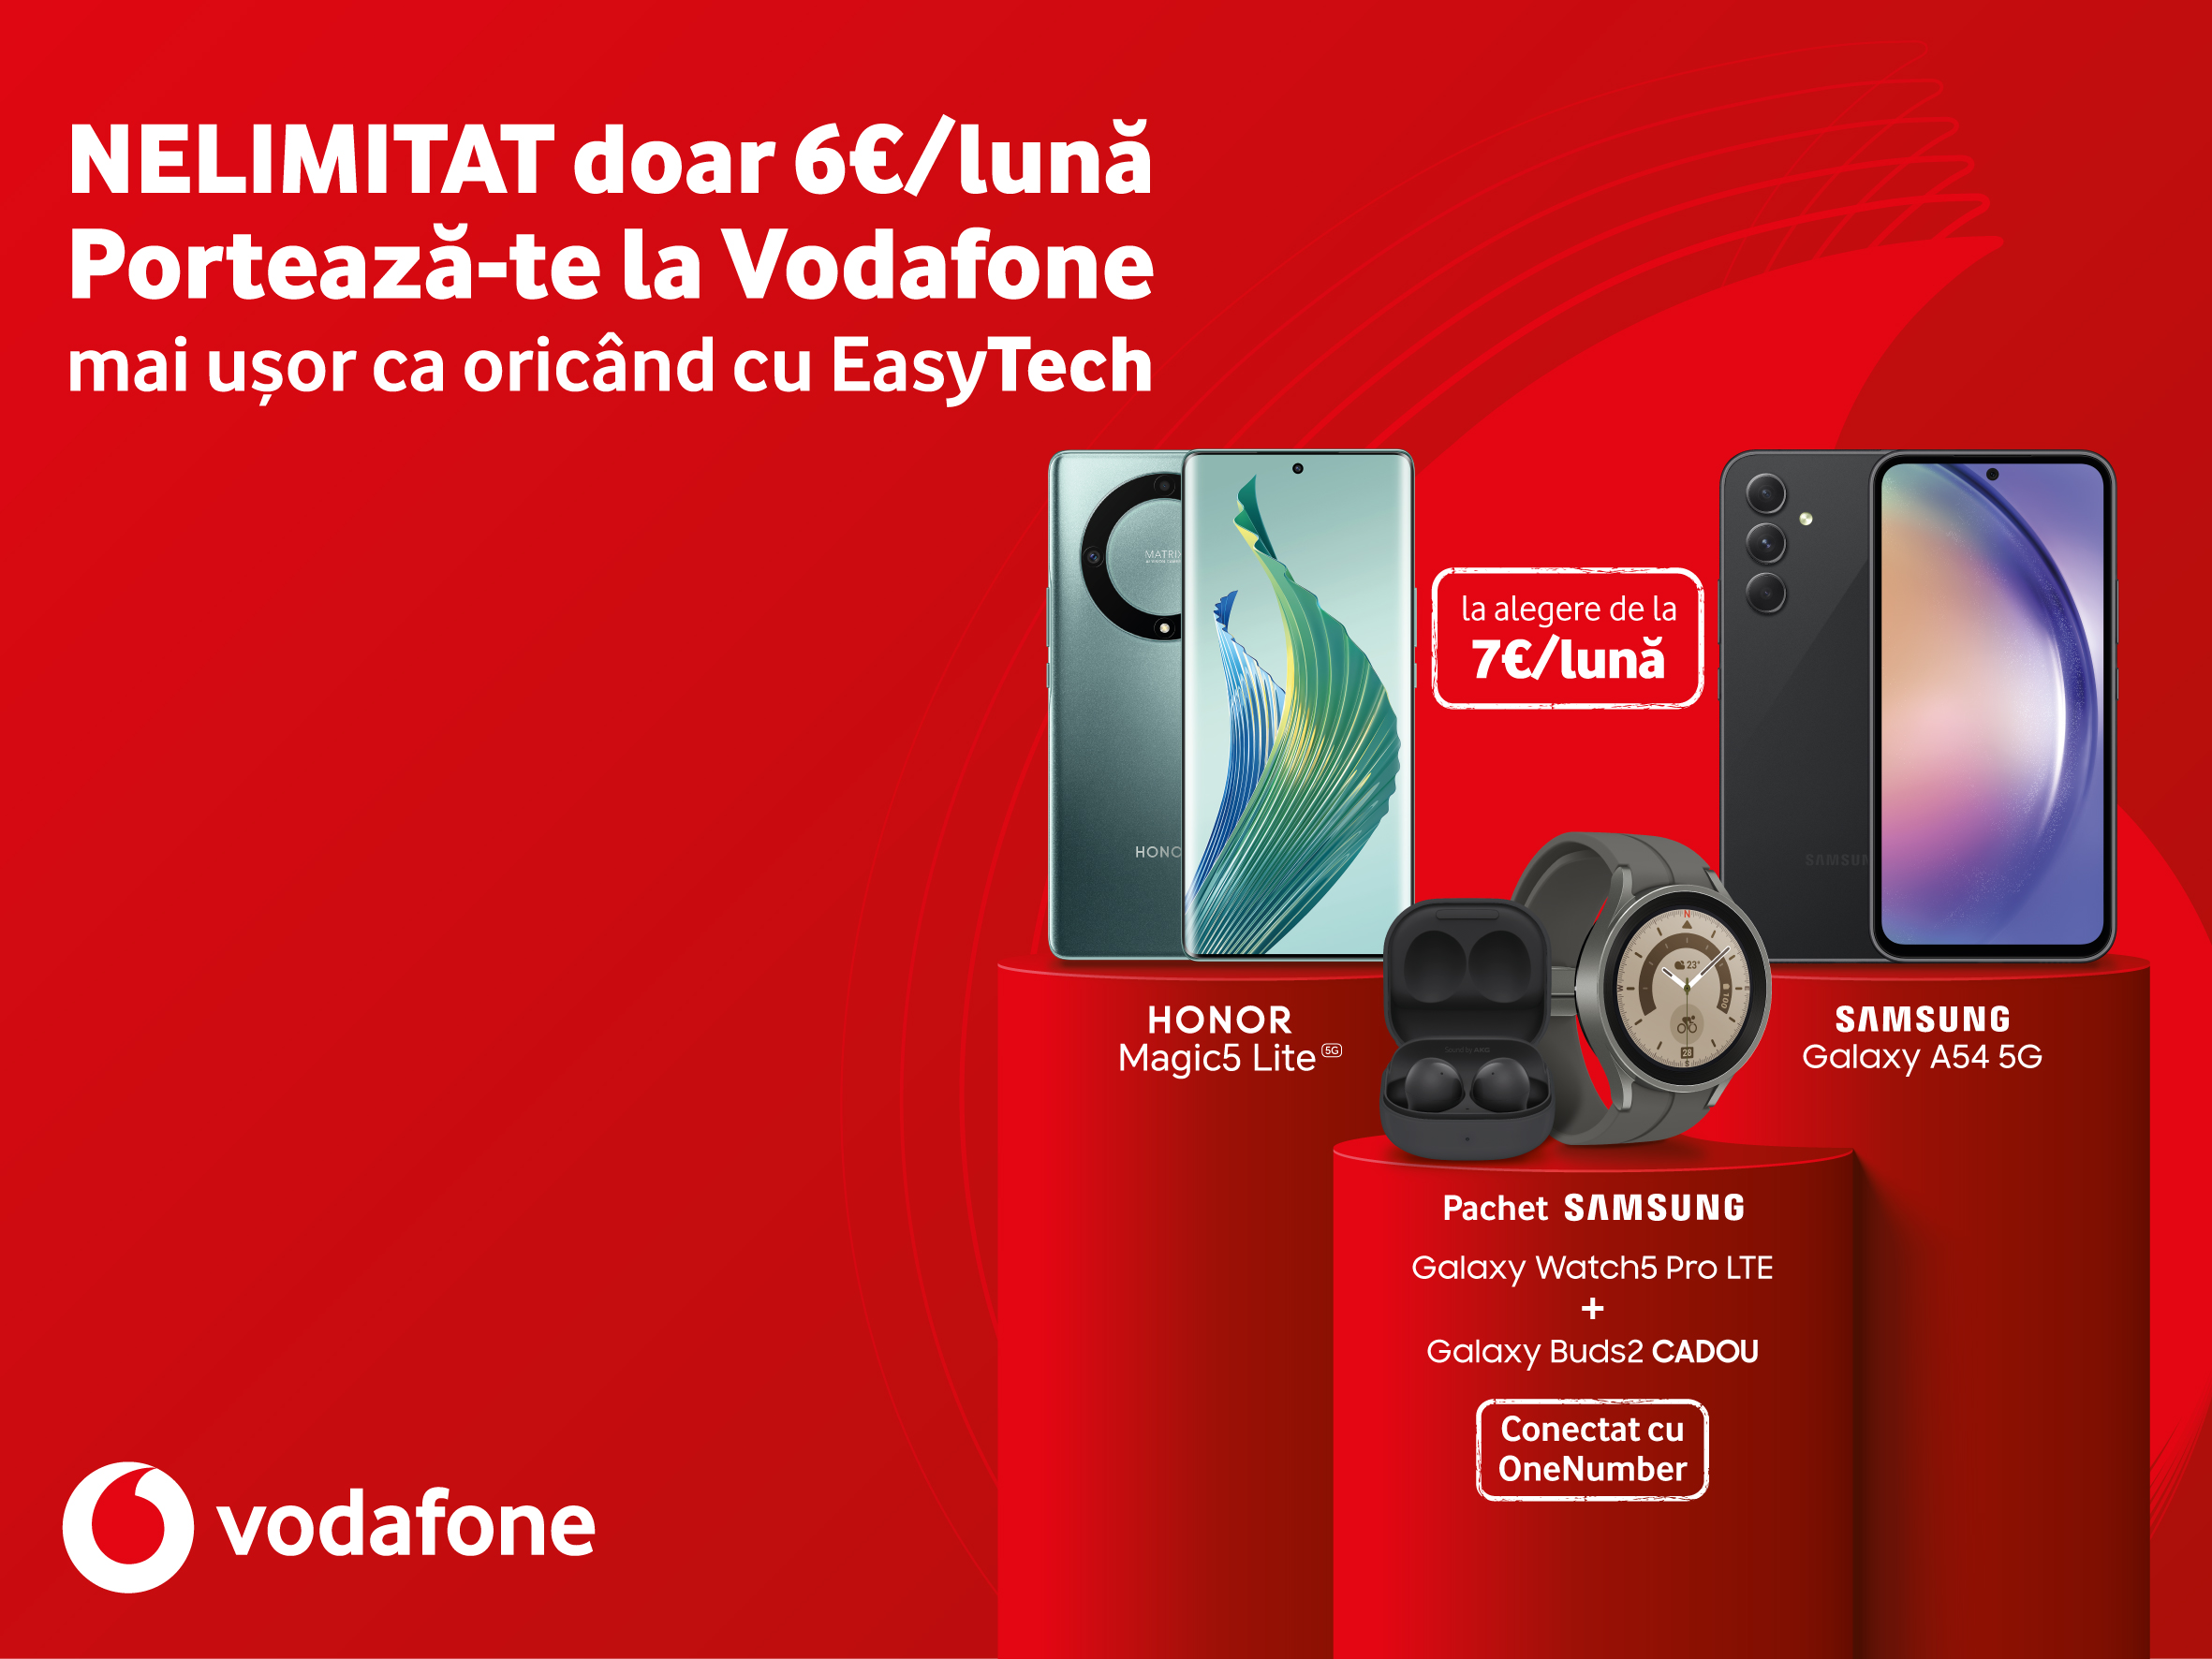 EasyTech porting at Vodafone: unlimited on mobile with 6 euro/month and gadgets with super discounts, in 36 instalments, without interest